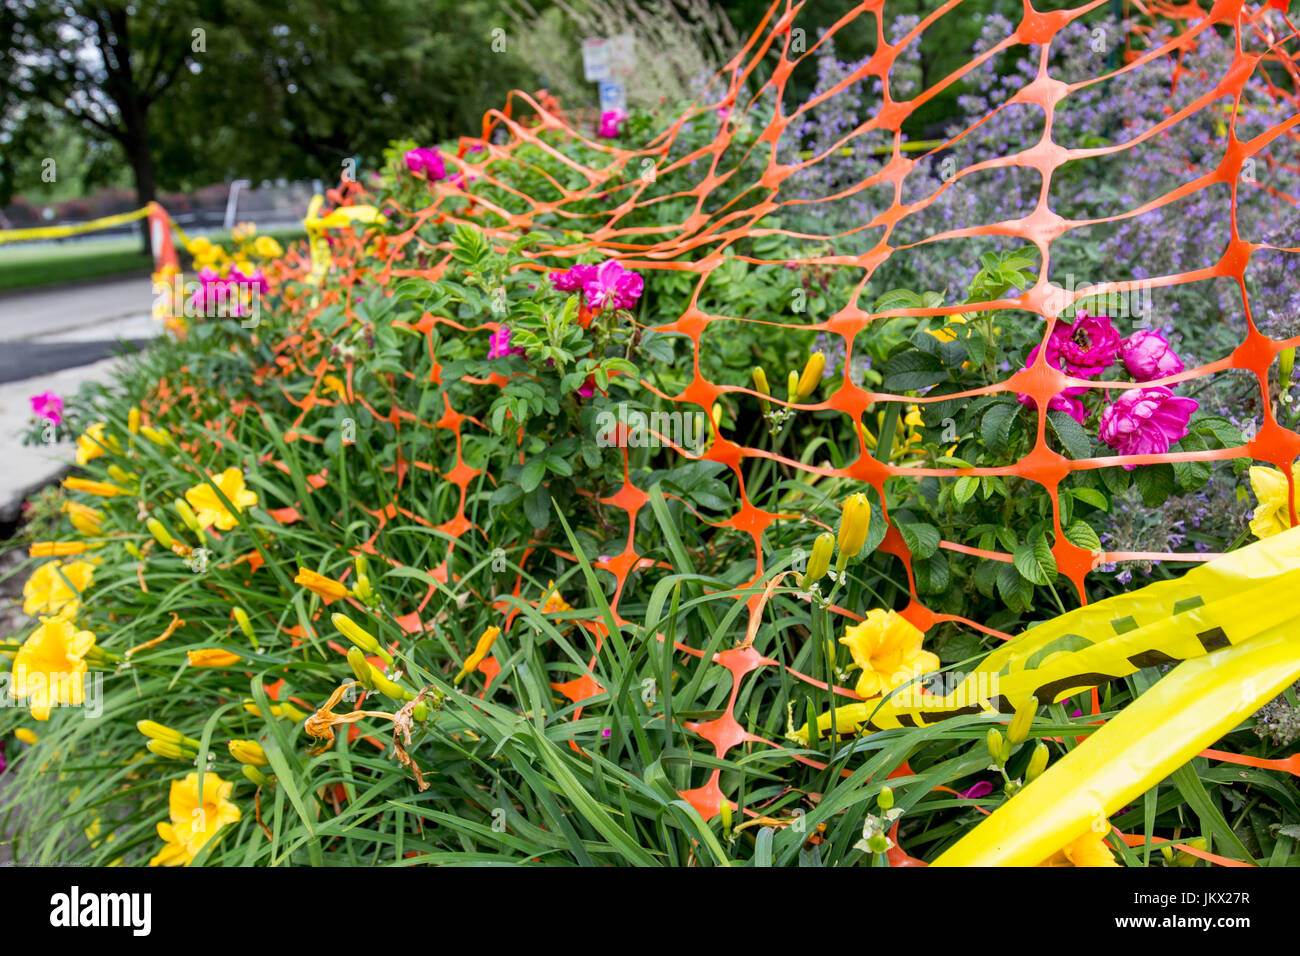 Colorful arrangement of flowers bound down by orange fencing and construction makes for a beautiful scene. Stock Photo